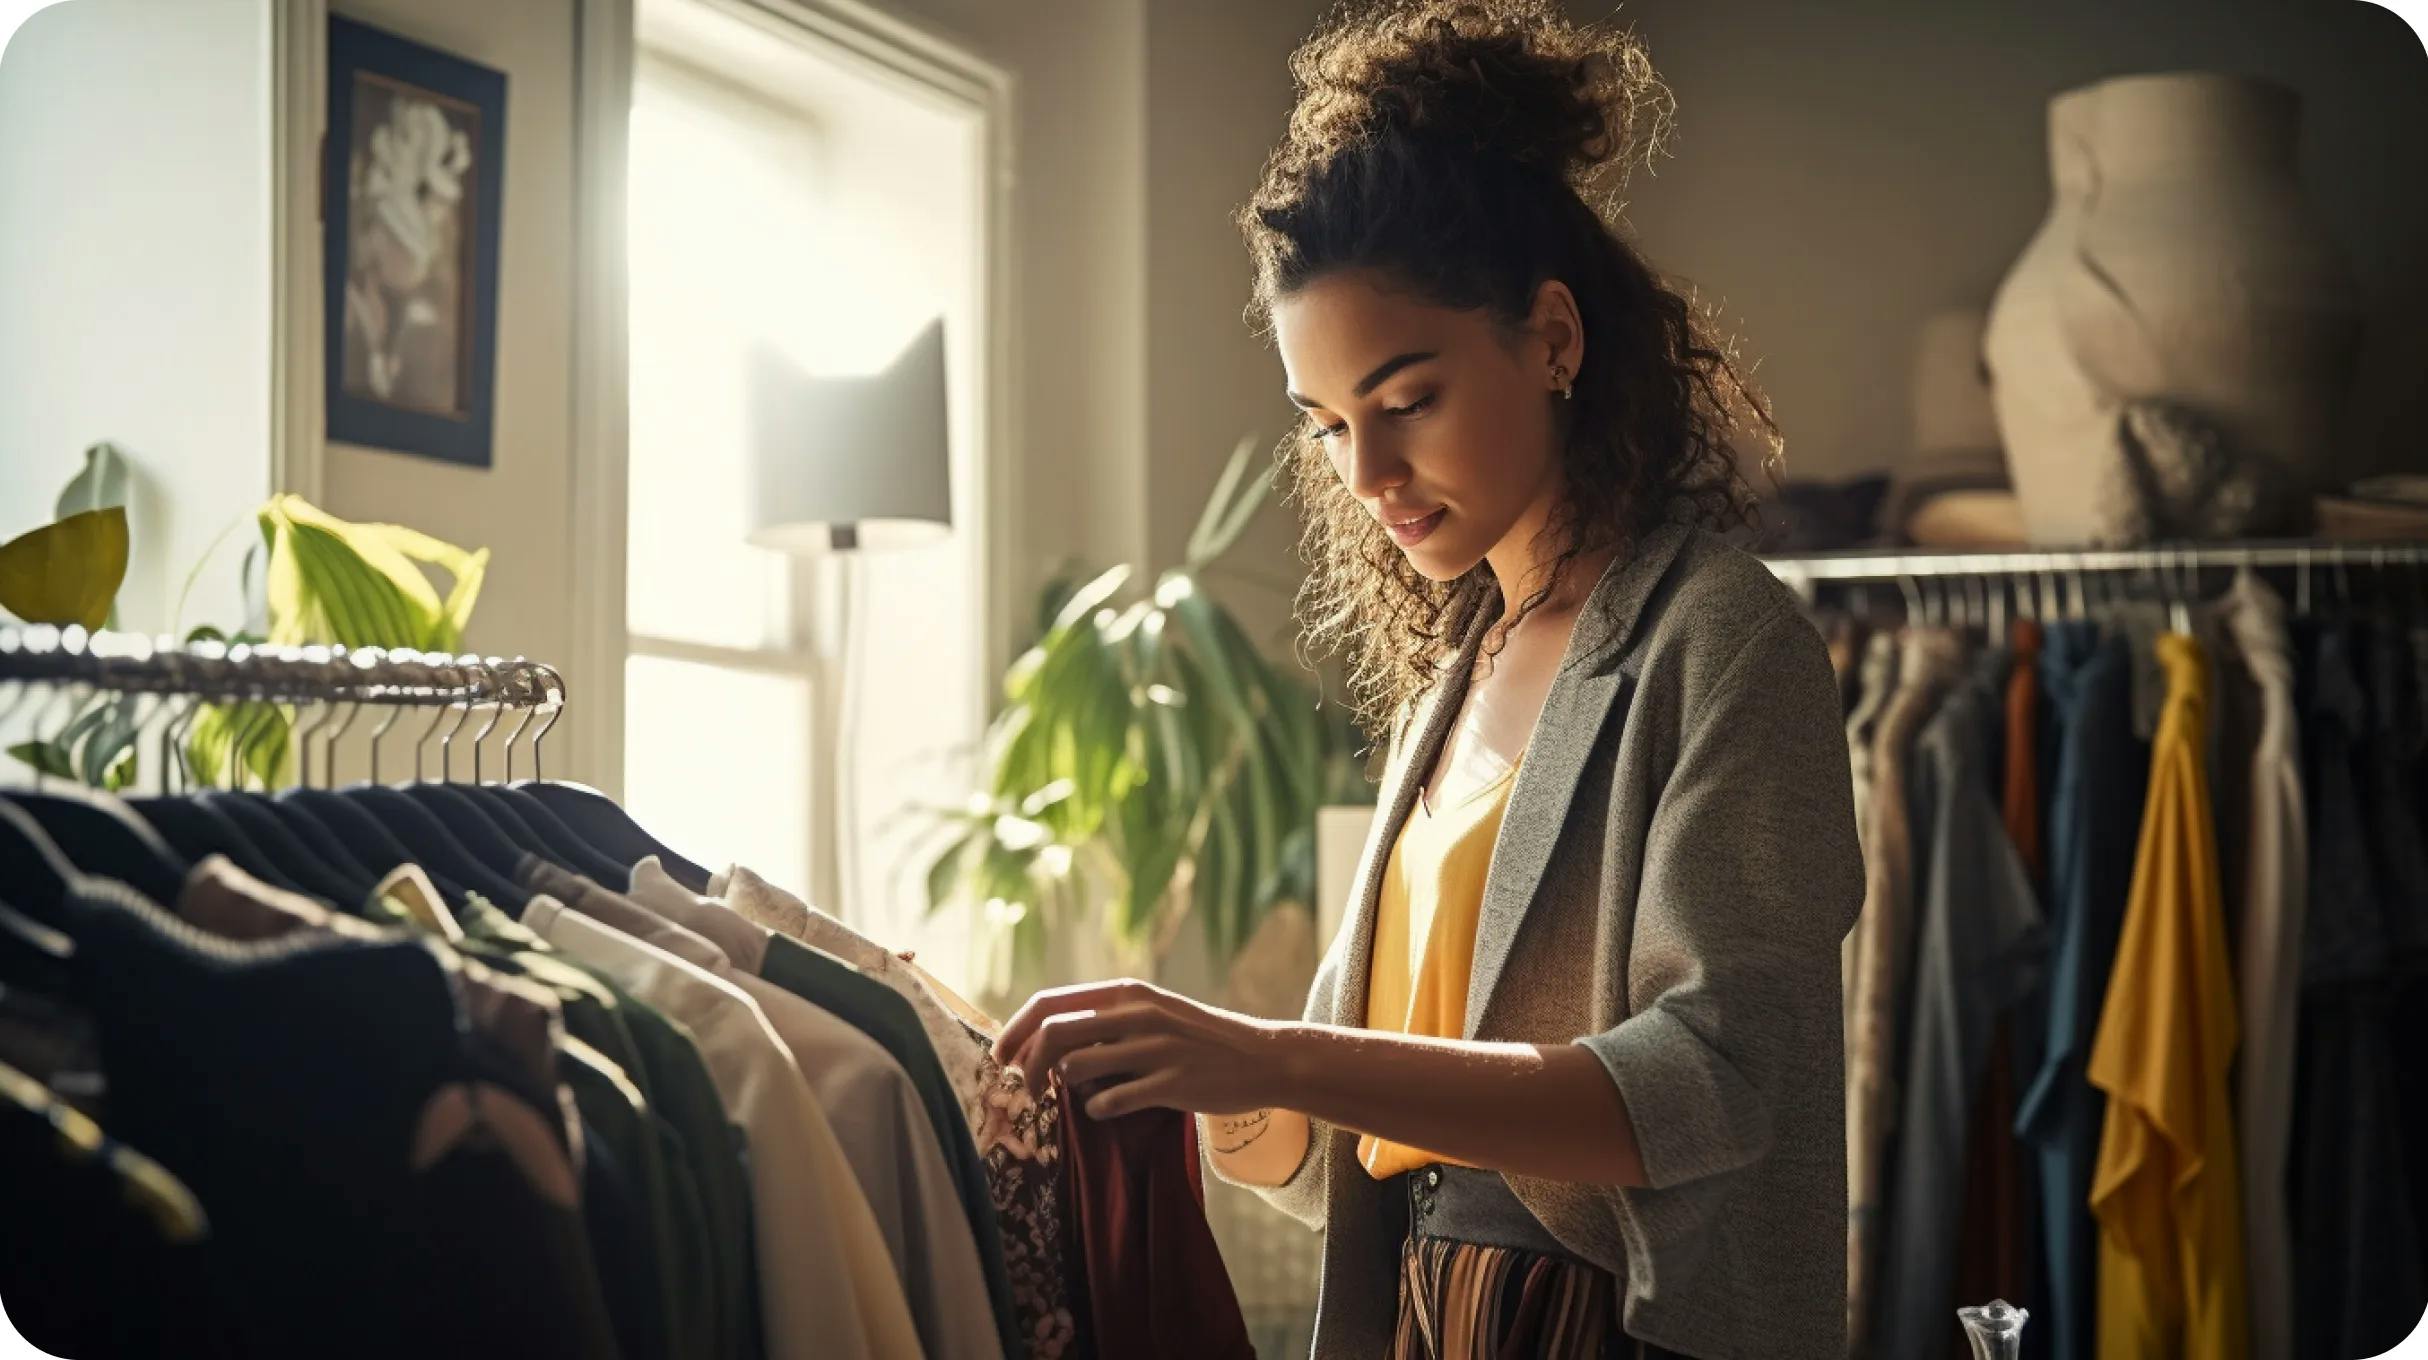 How to Start a Clothing Business from Home in 8 Easy Steps